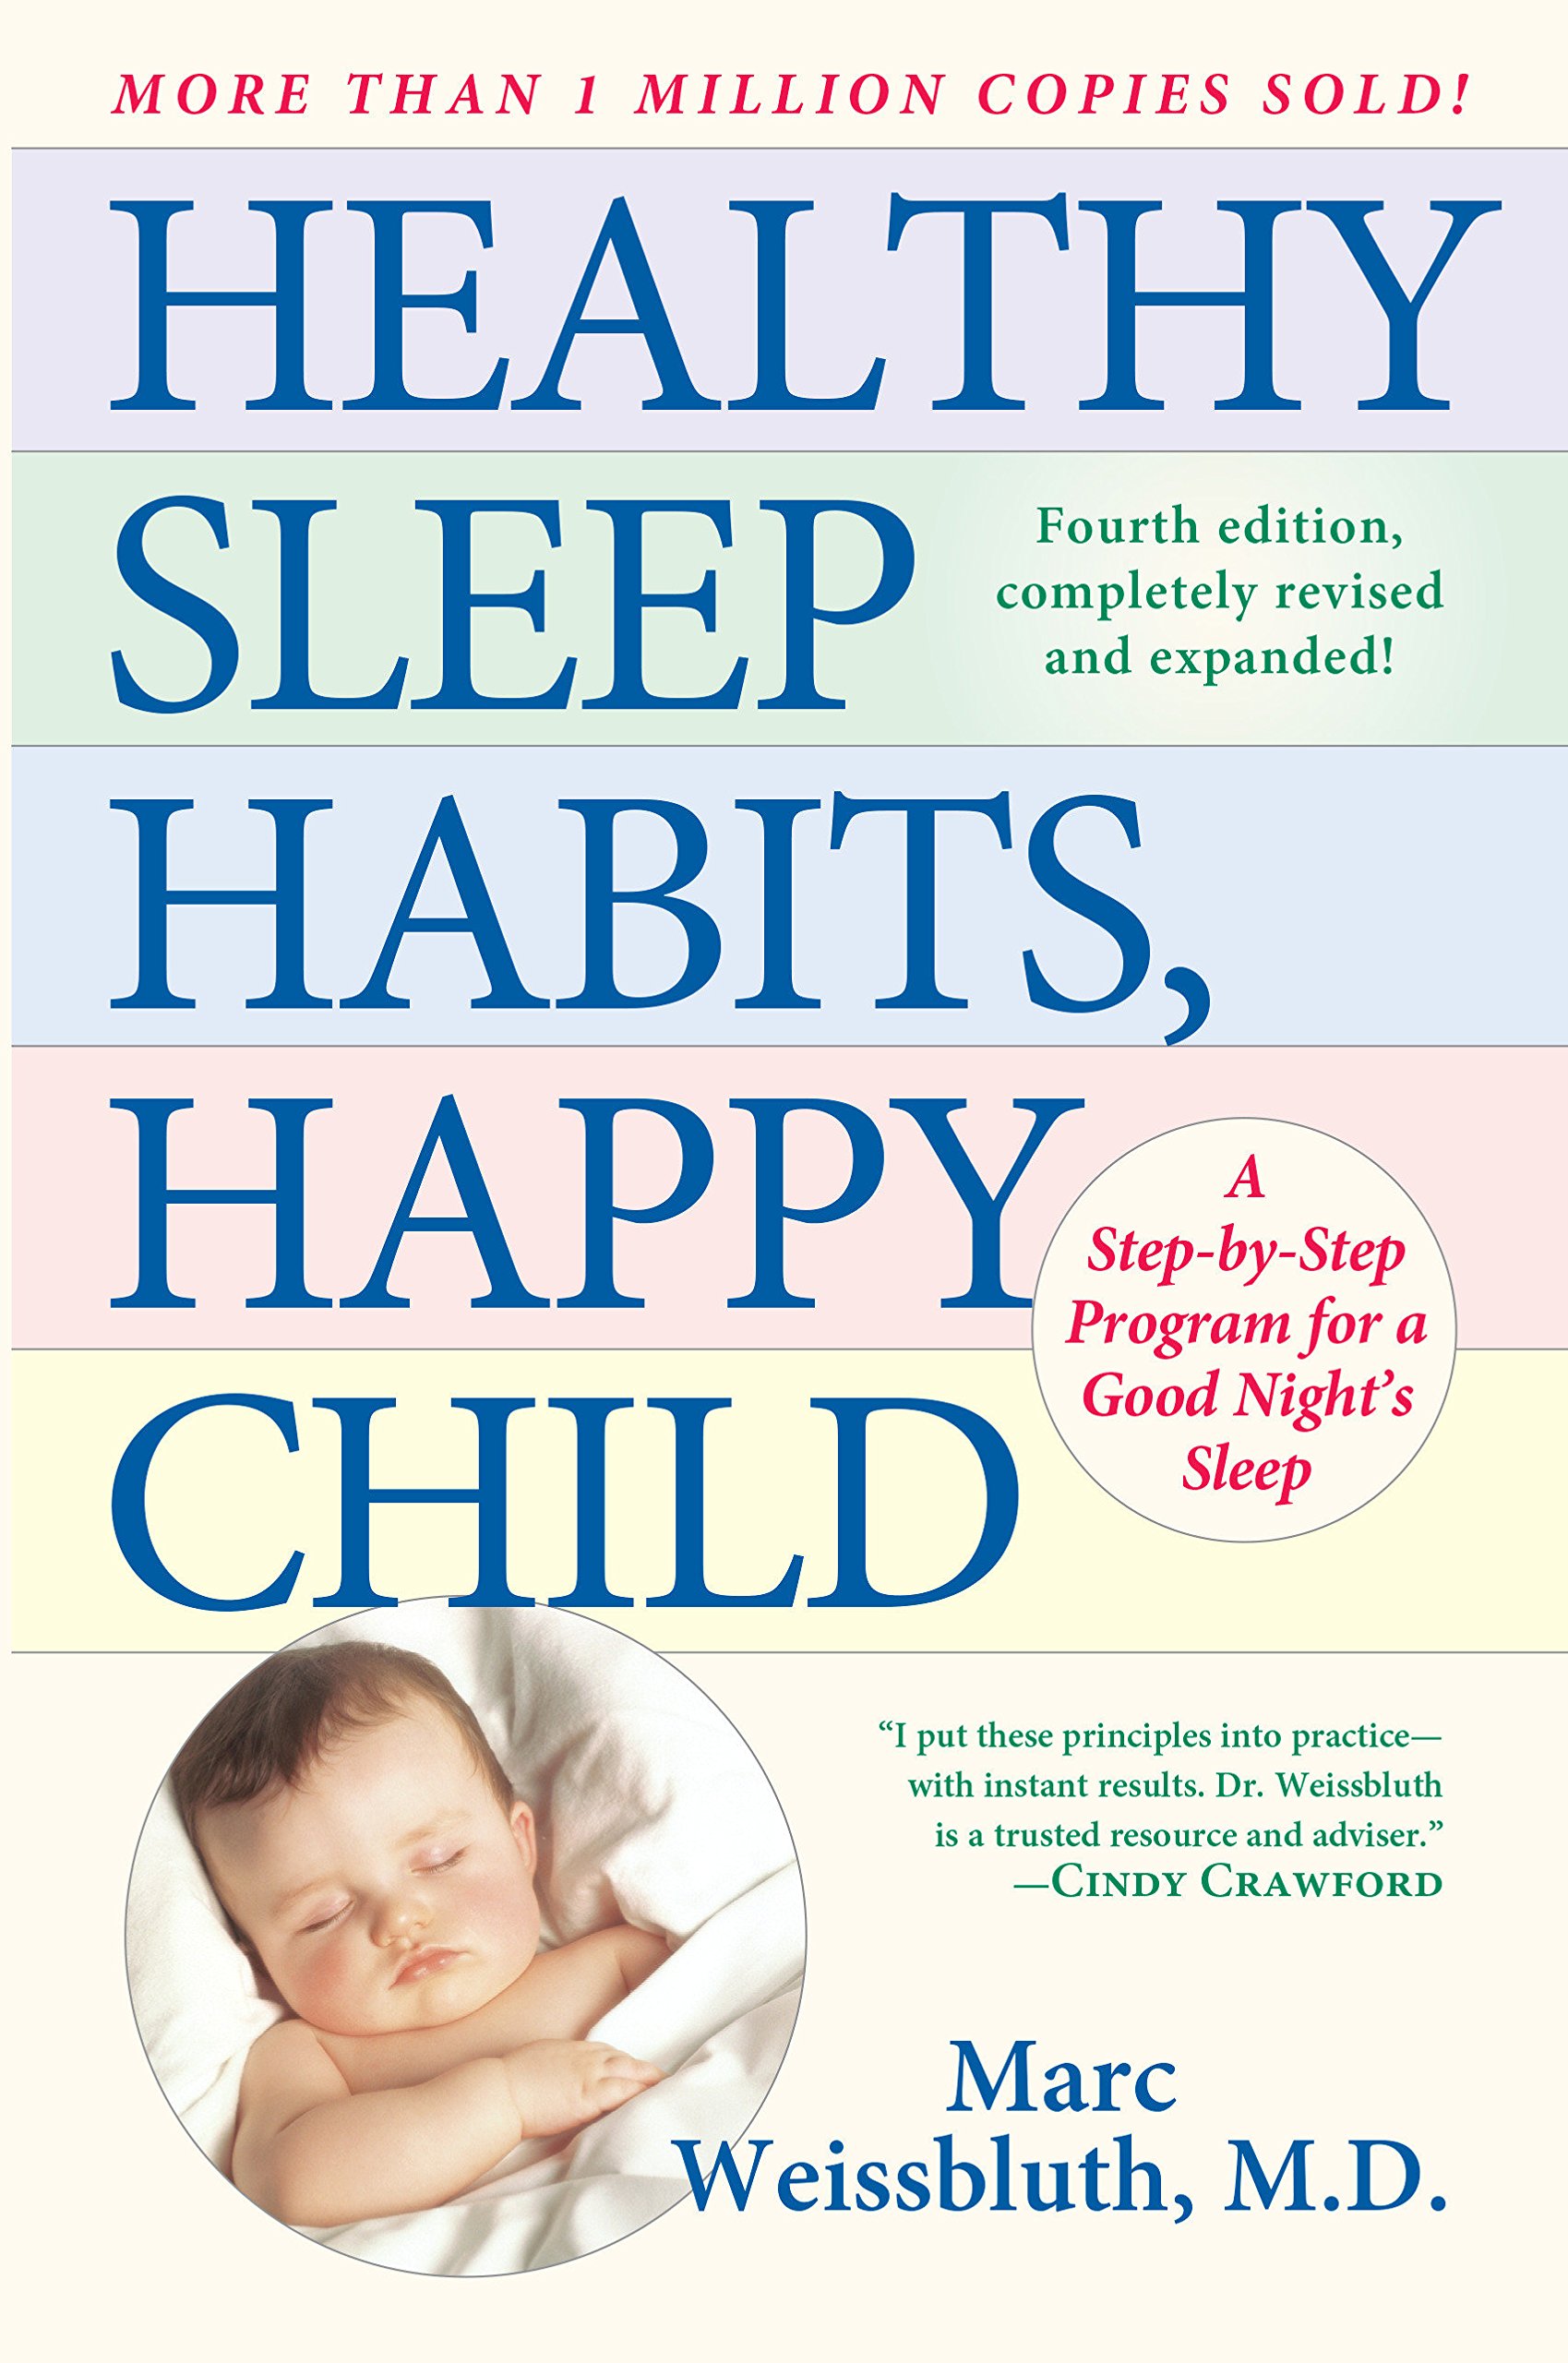 Top 17 Best Sleep Training Books for Babies Reviews in 2022 7